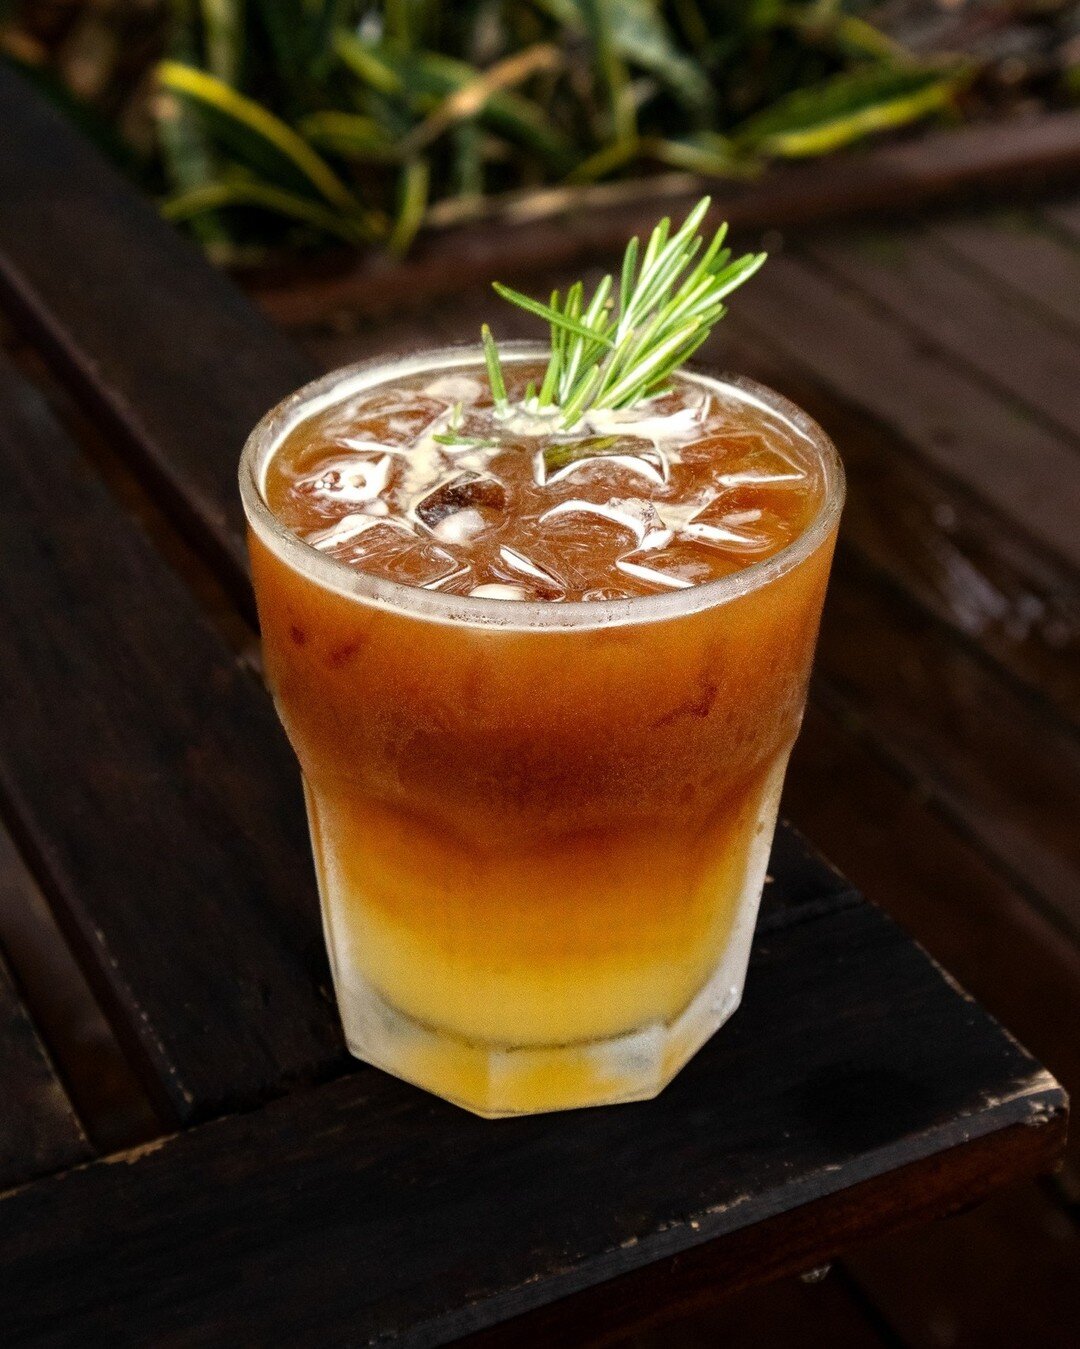 Coffee? Refreshing? Can it be? 

It can! A refreshing take on the classic cocktail and inspired by Florida brush, the Palmetto Highball uses natural Pineapple juice and Single-Origin Espresso to craft a summer classic in the making.

Get a taste of t